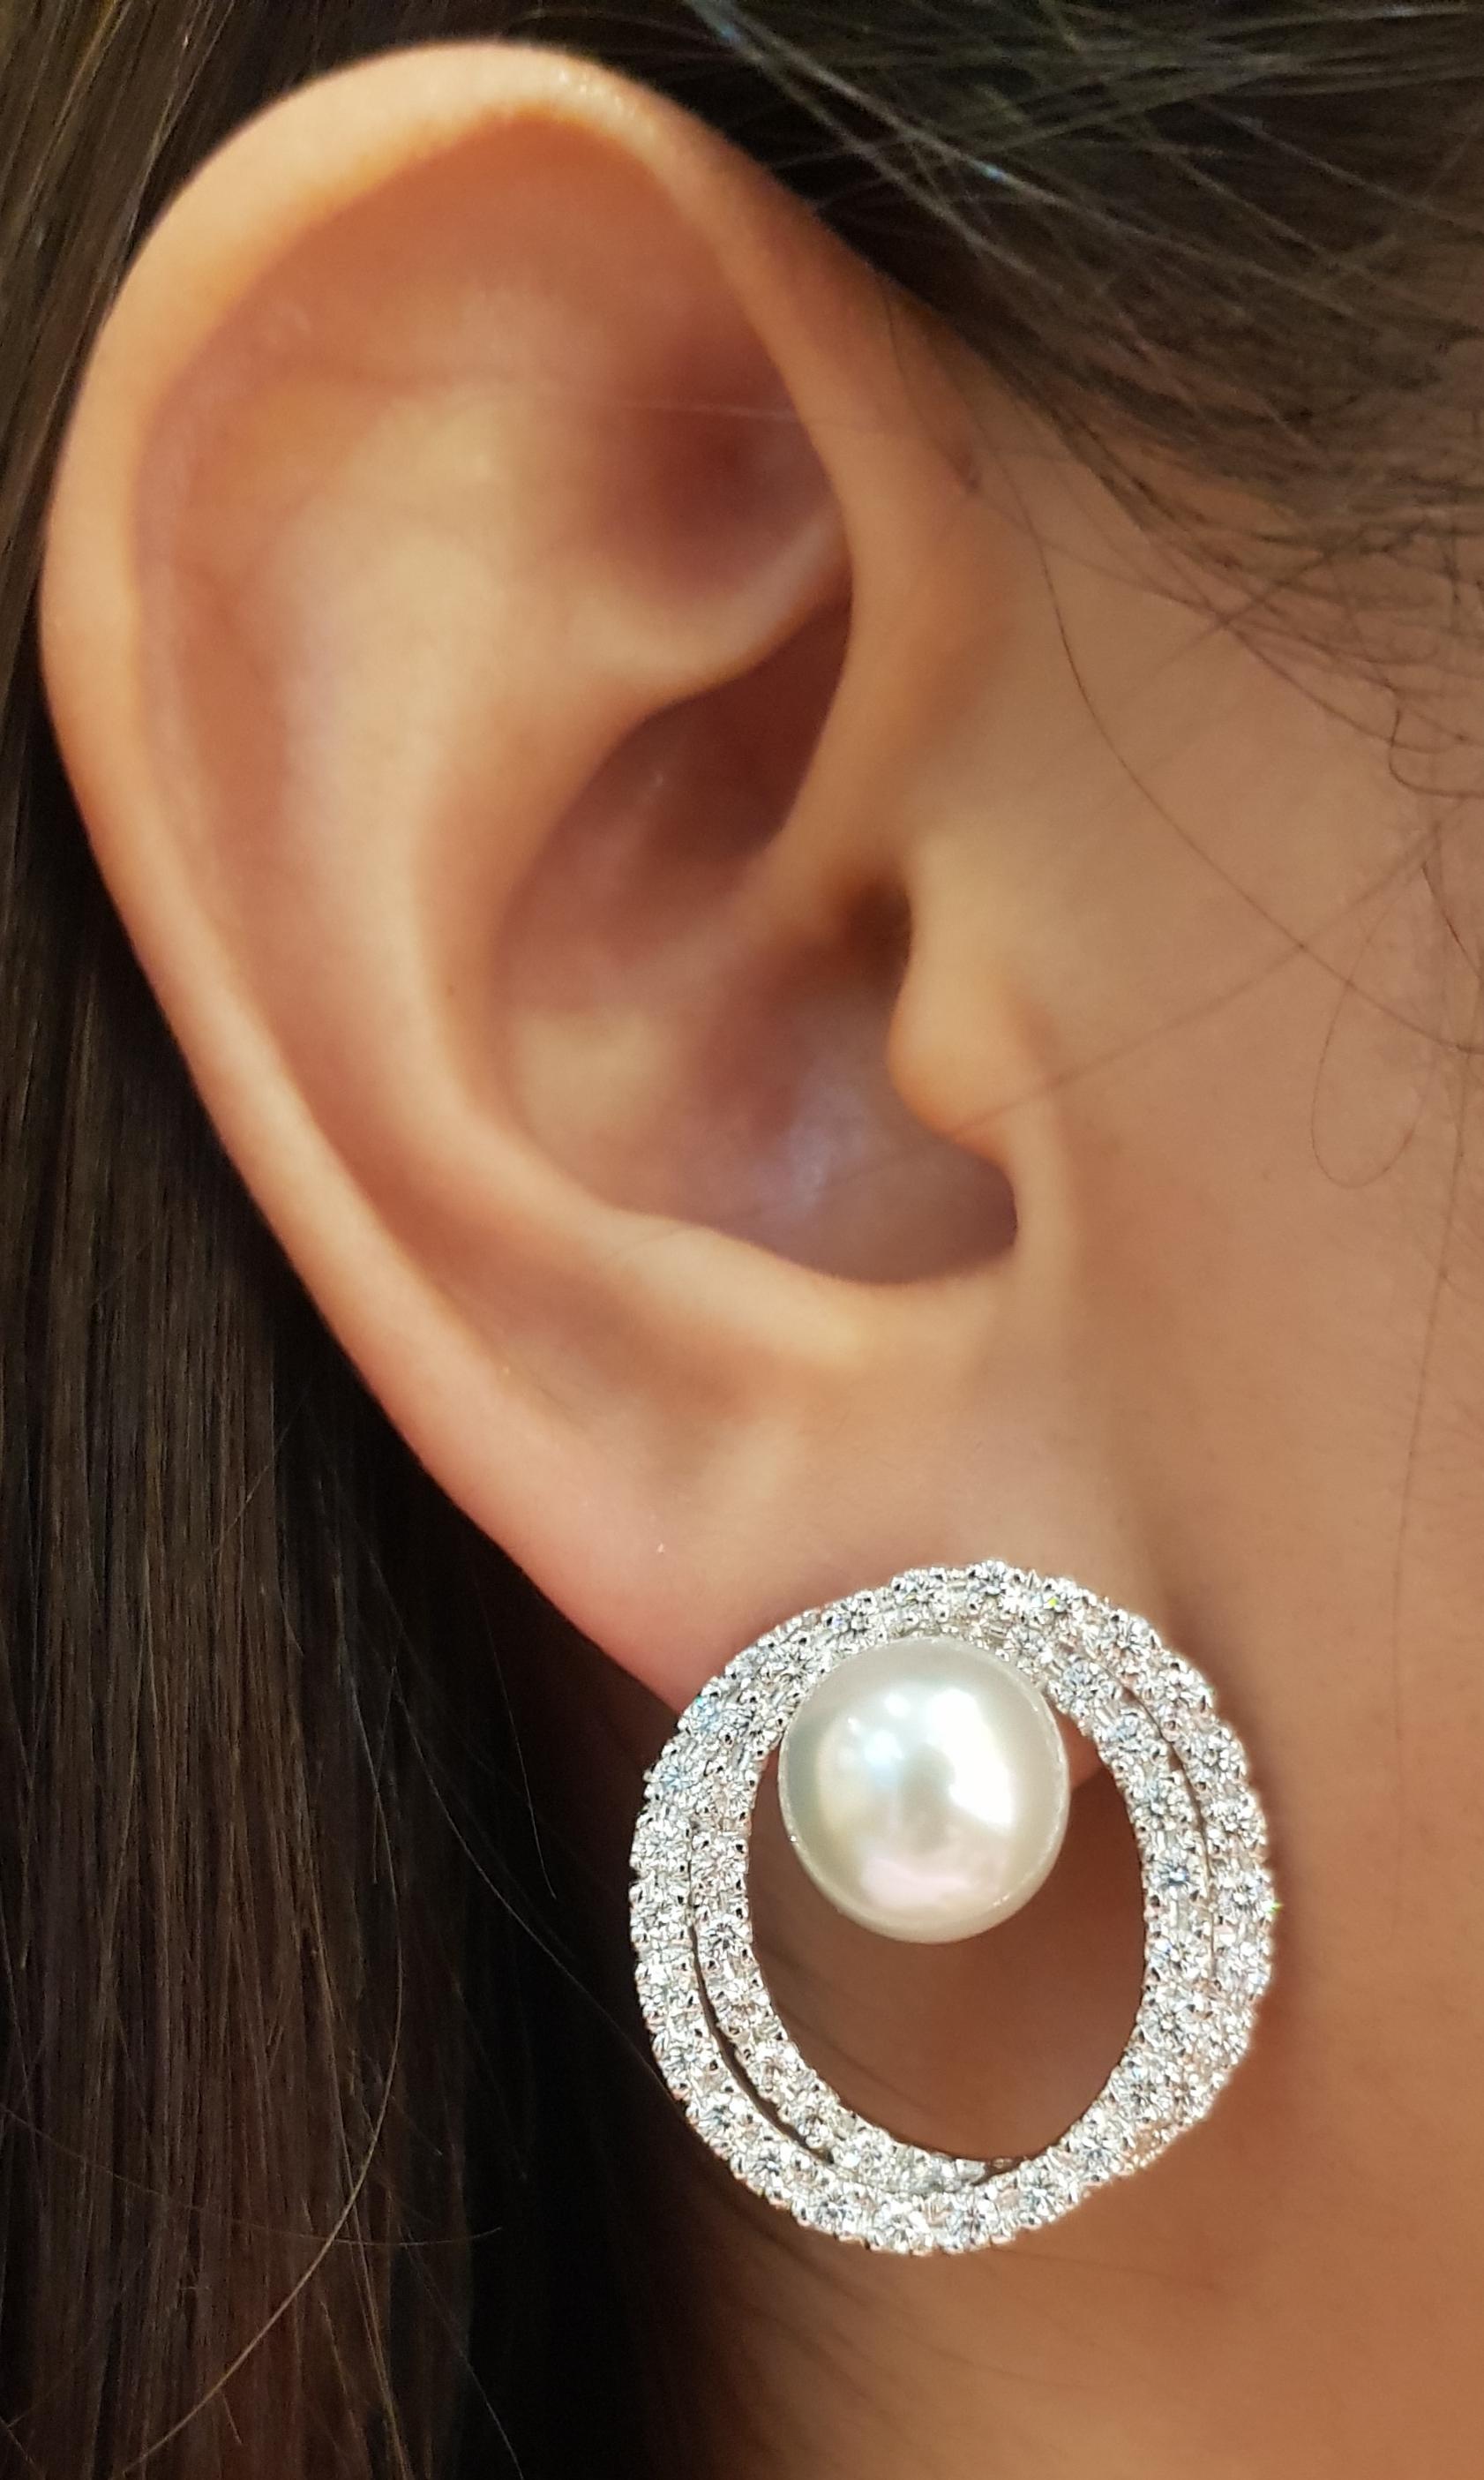 South Sea Pearl with Diamond 2.49 carats Earrings set in 18 Karat White Gold Settings

Width:   2.40 cm 
Length:  2.50 cm
Total Weight: 14.17 grams

South Sea Pearl : 10 mm

